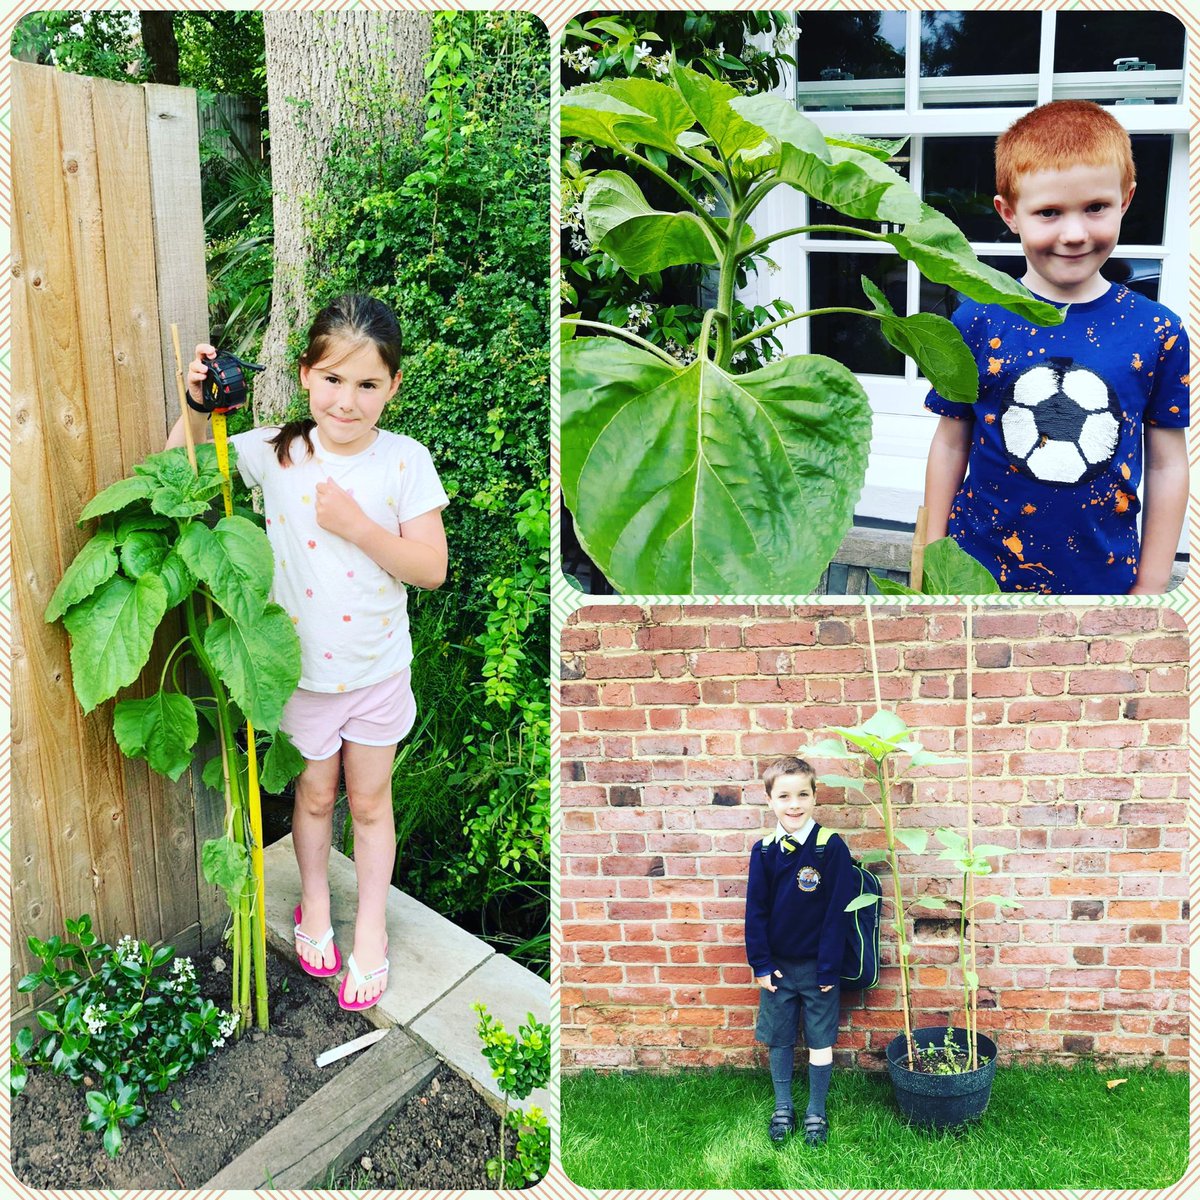 Presenting the 3 winners of our #SunflowerCompetition 2021
🌻🌻🌻 🥁🥁🥁🏆🏆🏆
Gracie Campsie, George Moore - Yr 2 and Thomas Stockwell, Yr 1 🎉👏💛
Congratulations to them & well done to all the kids who took part - they ALL did AMAZING! 
#stnickspta #growingflowers #Chislehurst